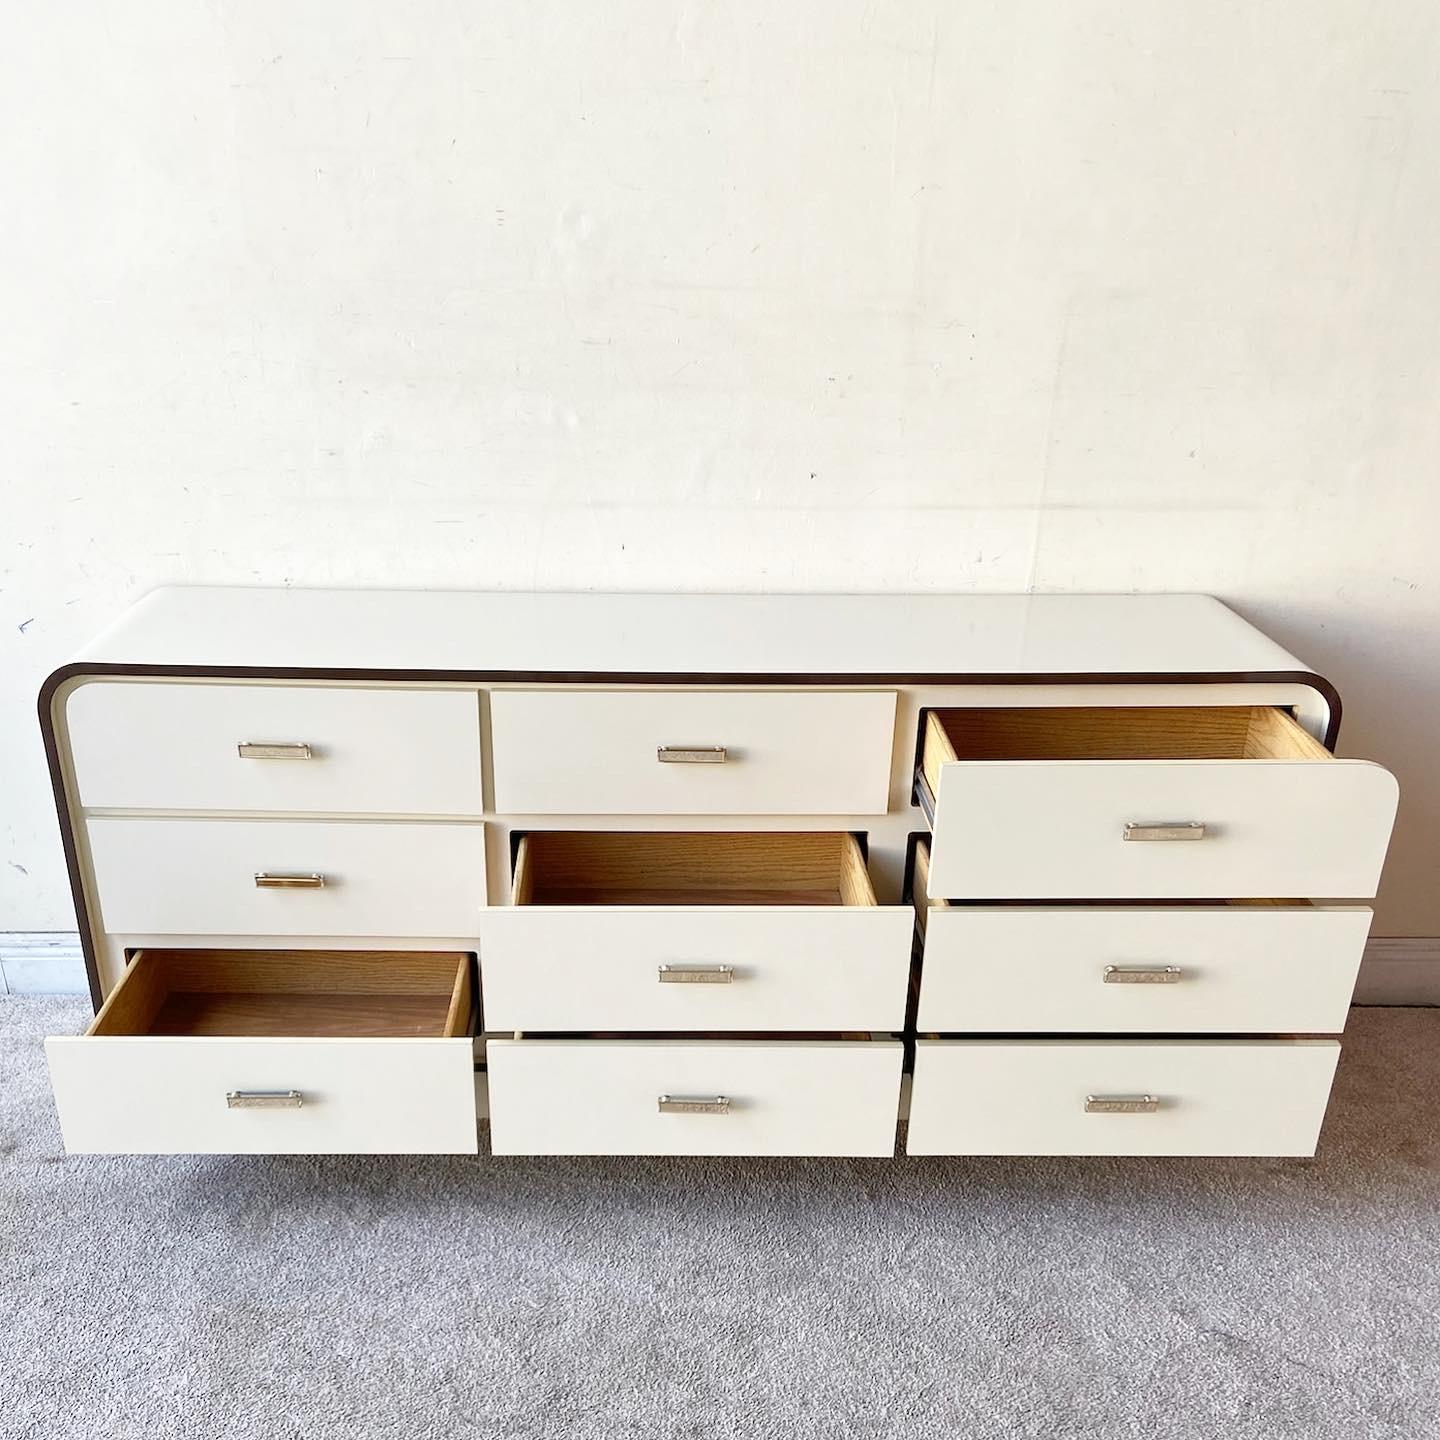 Excellent vintage Postmodern waterfall dresser. Features a cheese lacquer laminate with a brown laminate trim. Each of the 9 spacious drawers displays a lucite drawer pull.
Mirror measures 30.5” W, .5” D, 44” H.